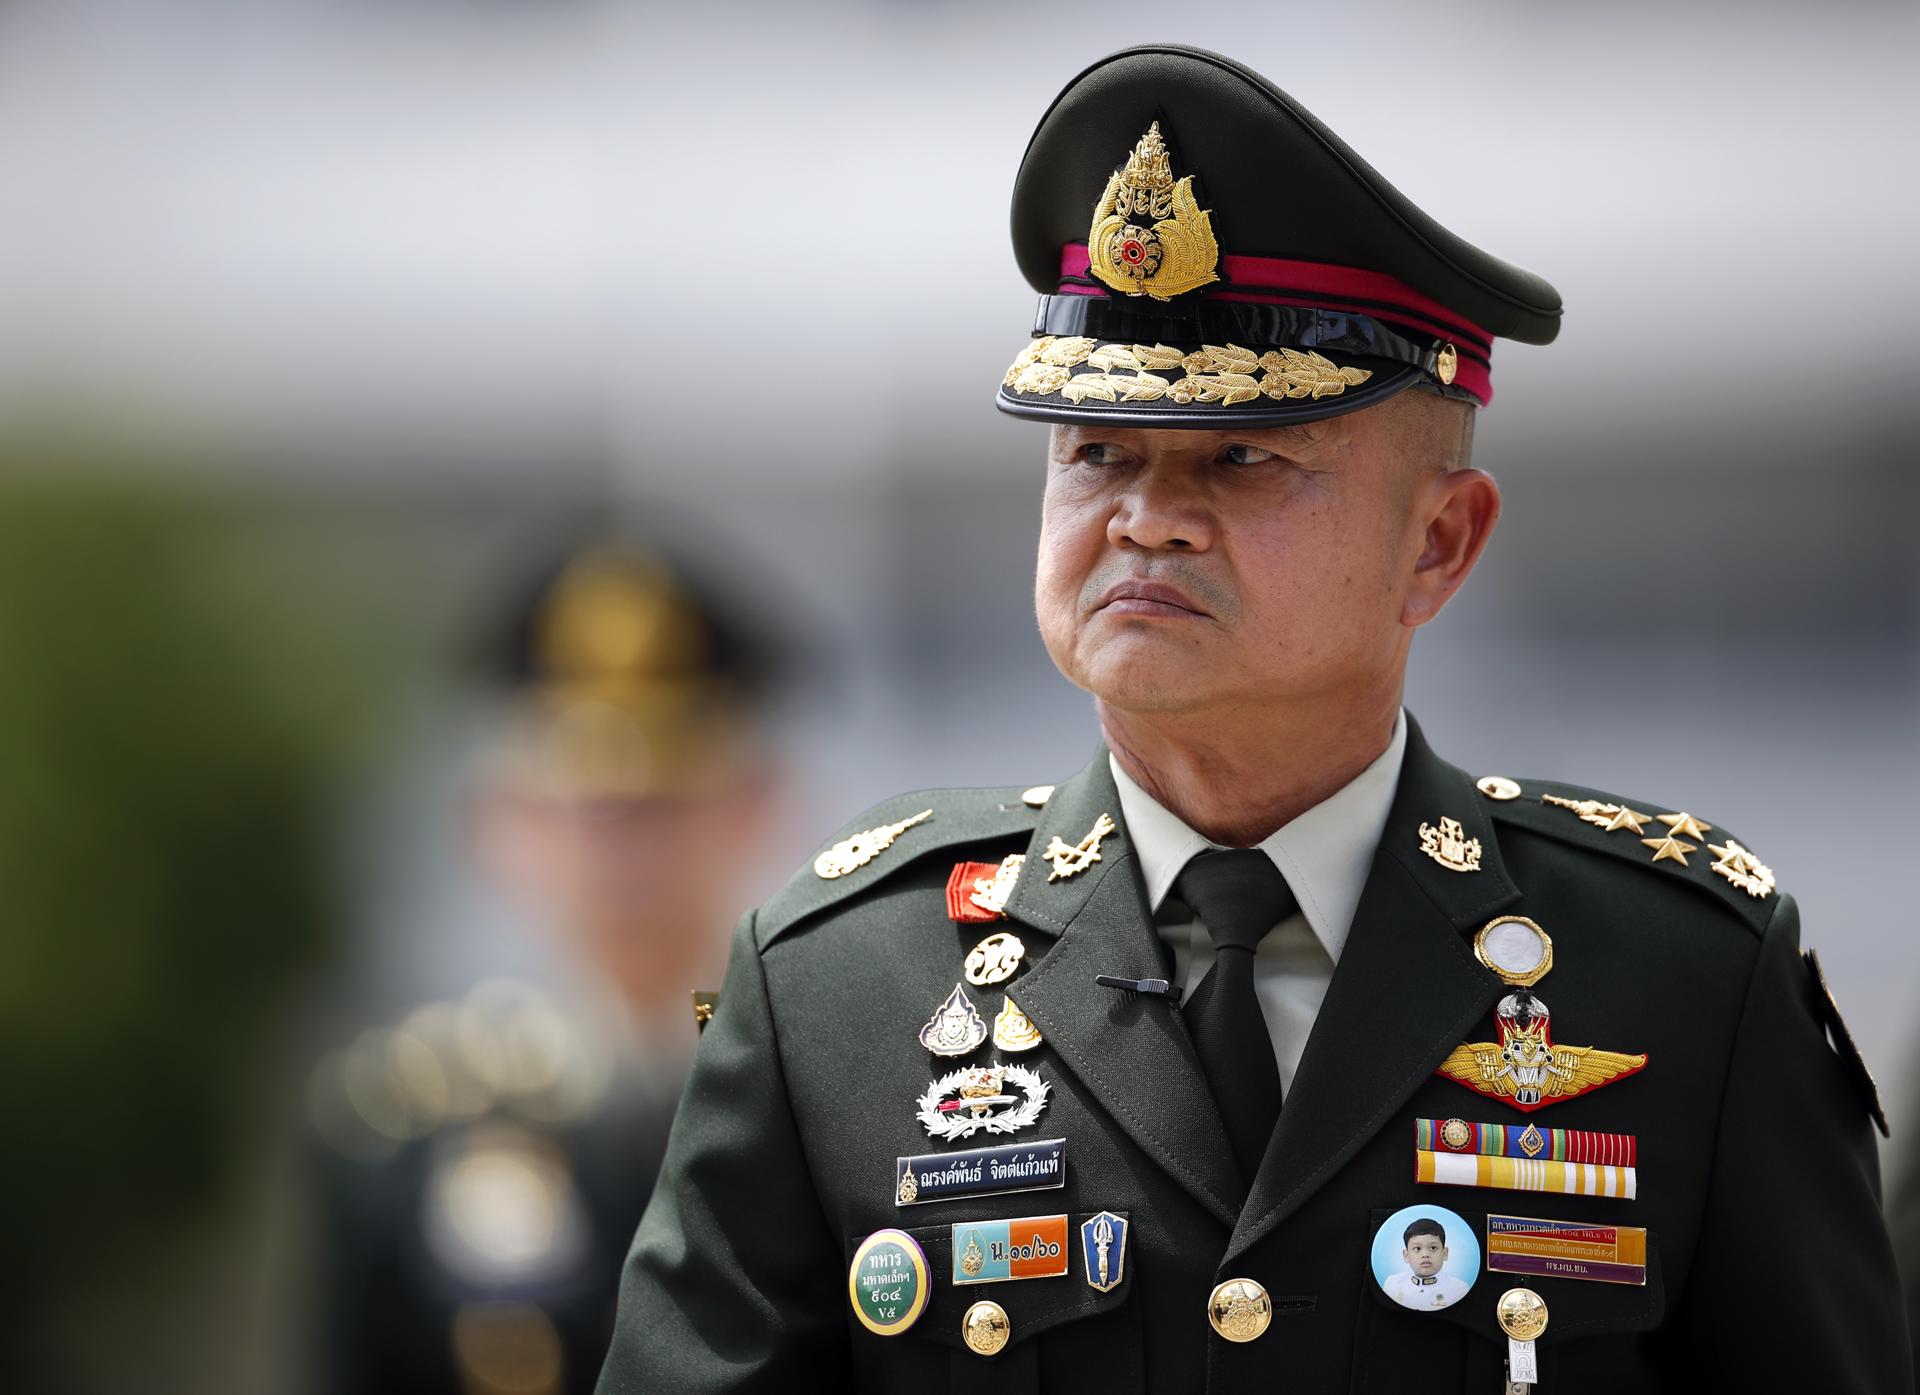 Thailand's newly appointed army chief General Narongpan Jittkaewtae during the army commander-in-chief handover ceremony at the Royal Thai Army headquarters in Bangkok, Thailand, 29 September 2020. EFE-EPA FILE/RUNGROJ YONGRIT